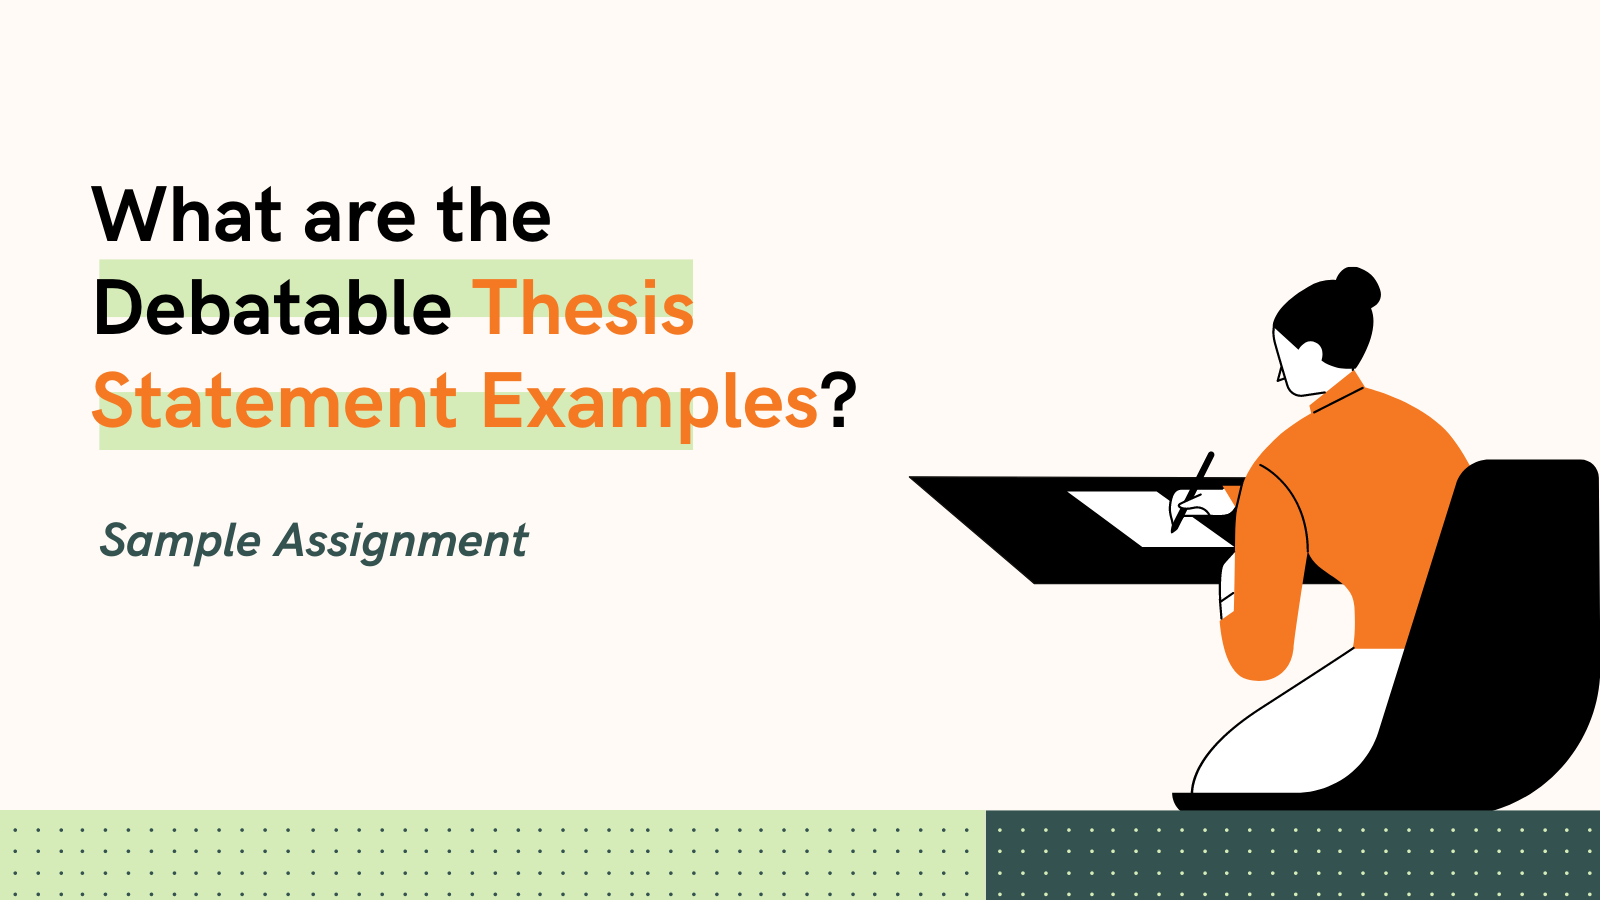 What are the Debatable Thesis Statement Examples?